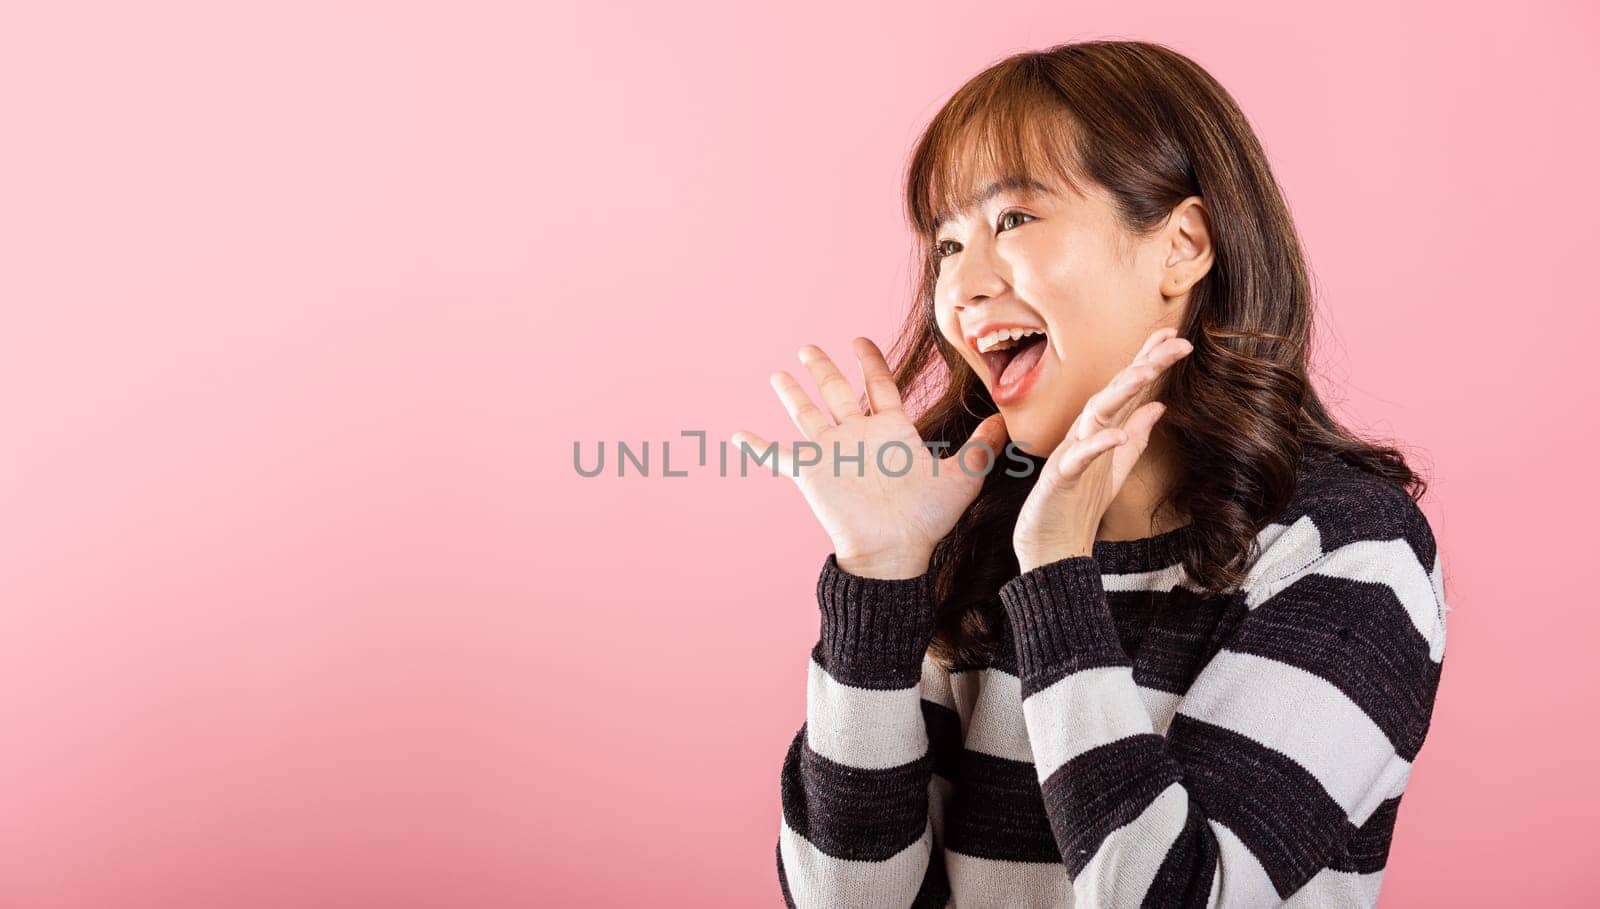 An Asian woman smiles with joy, making a victorious gesture by raising her fists. Studio shot on a pink background, radiating success and excitement.